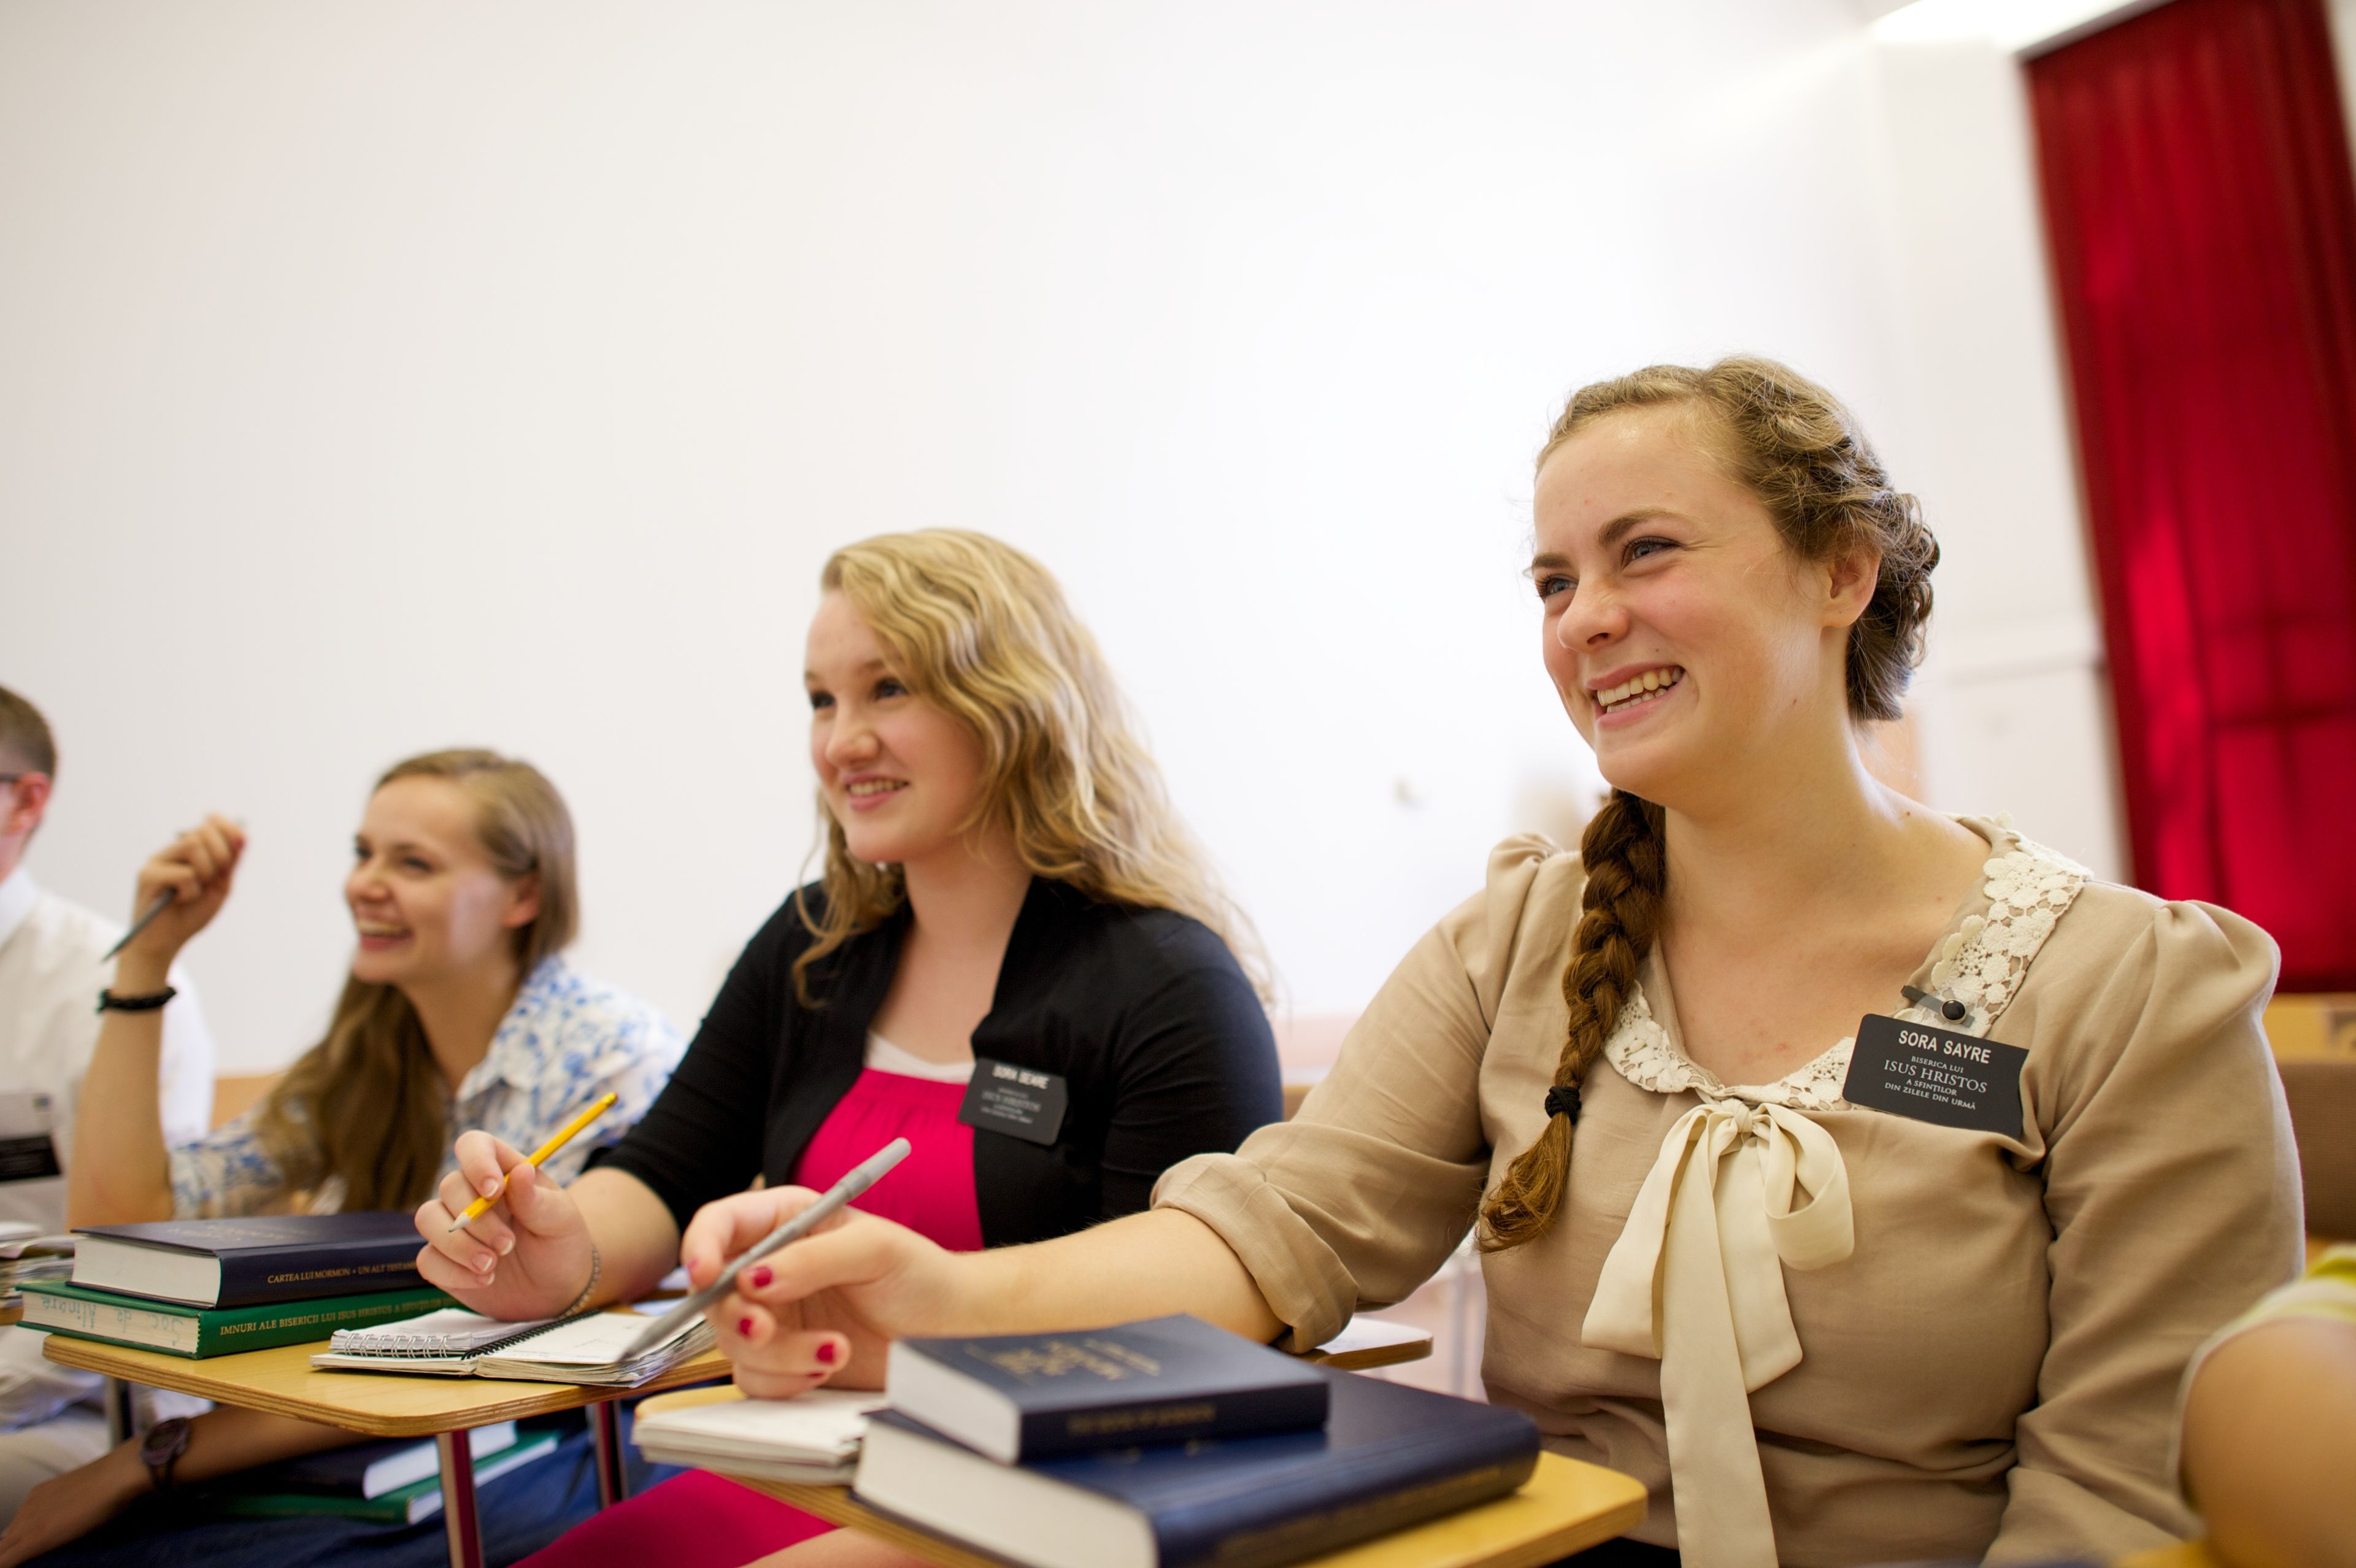 Three sister missionaries laughing while sitting at desks.